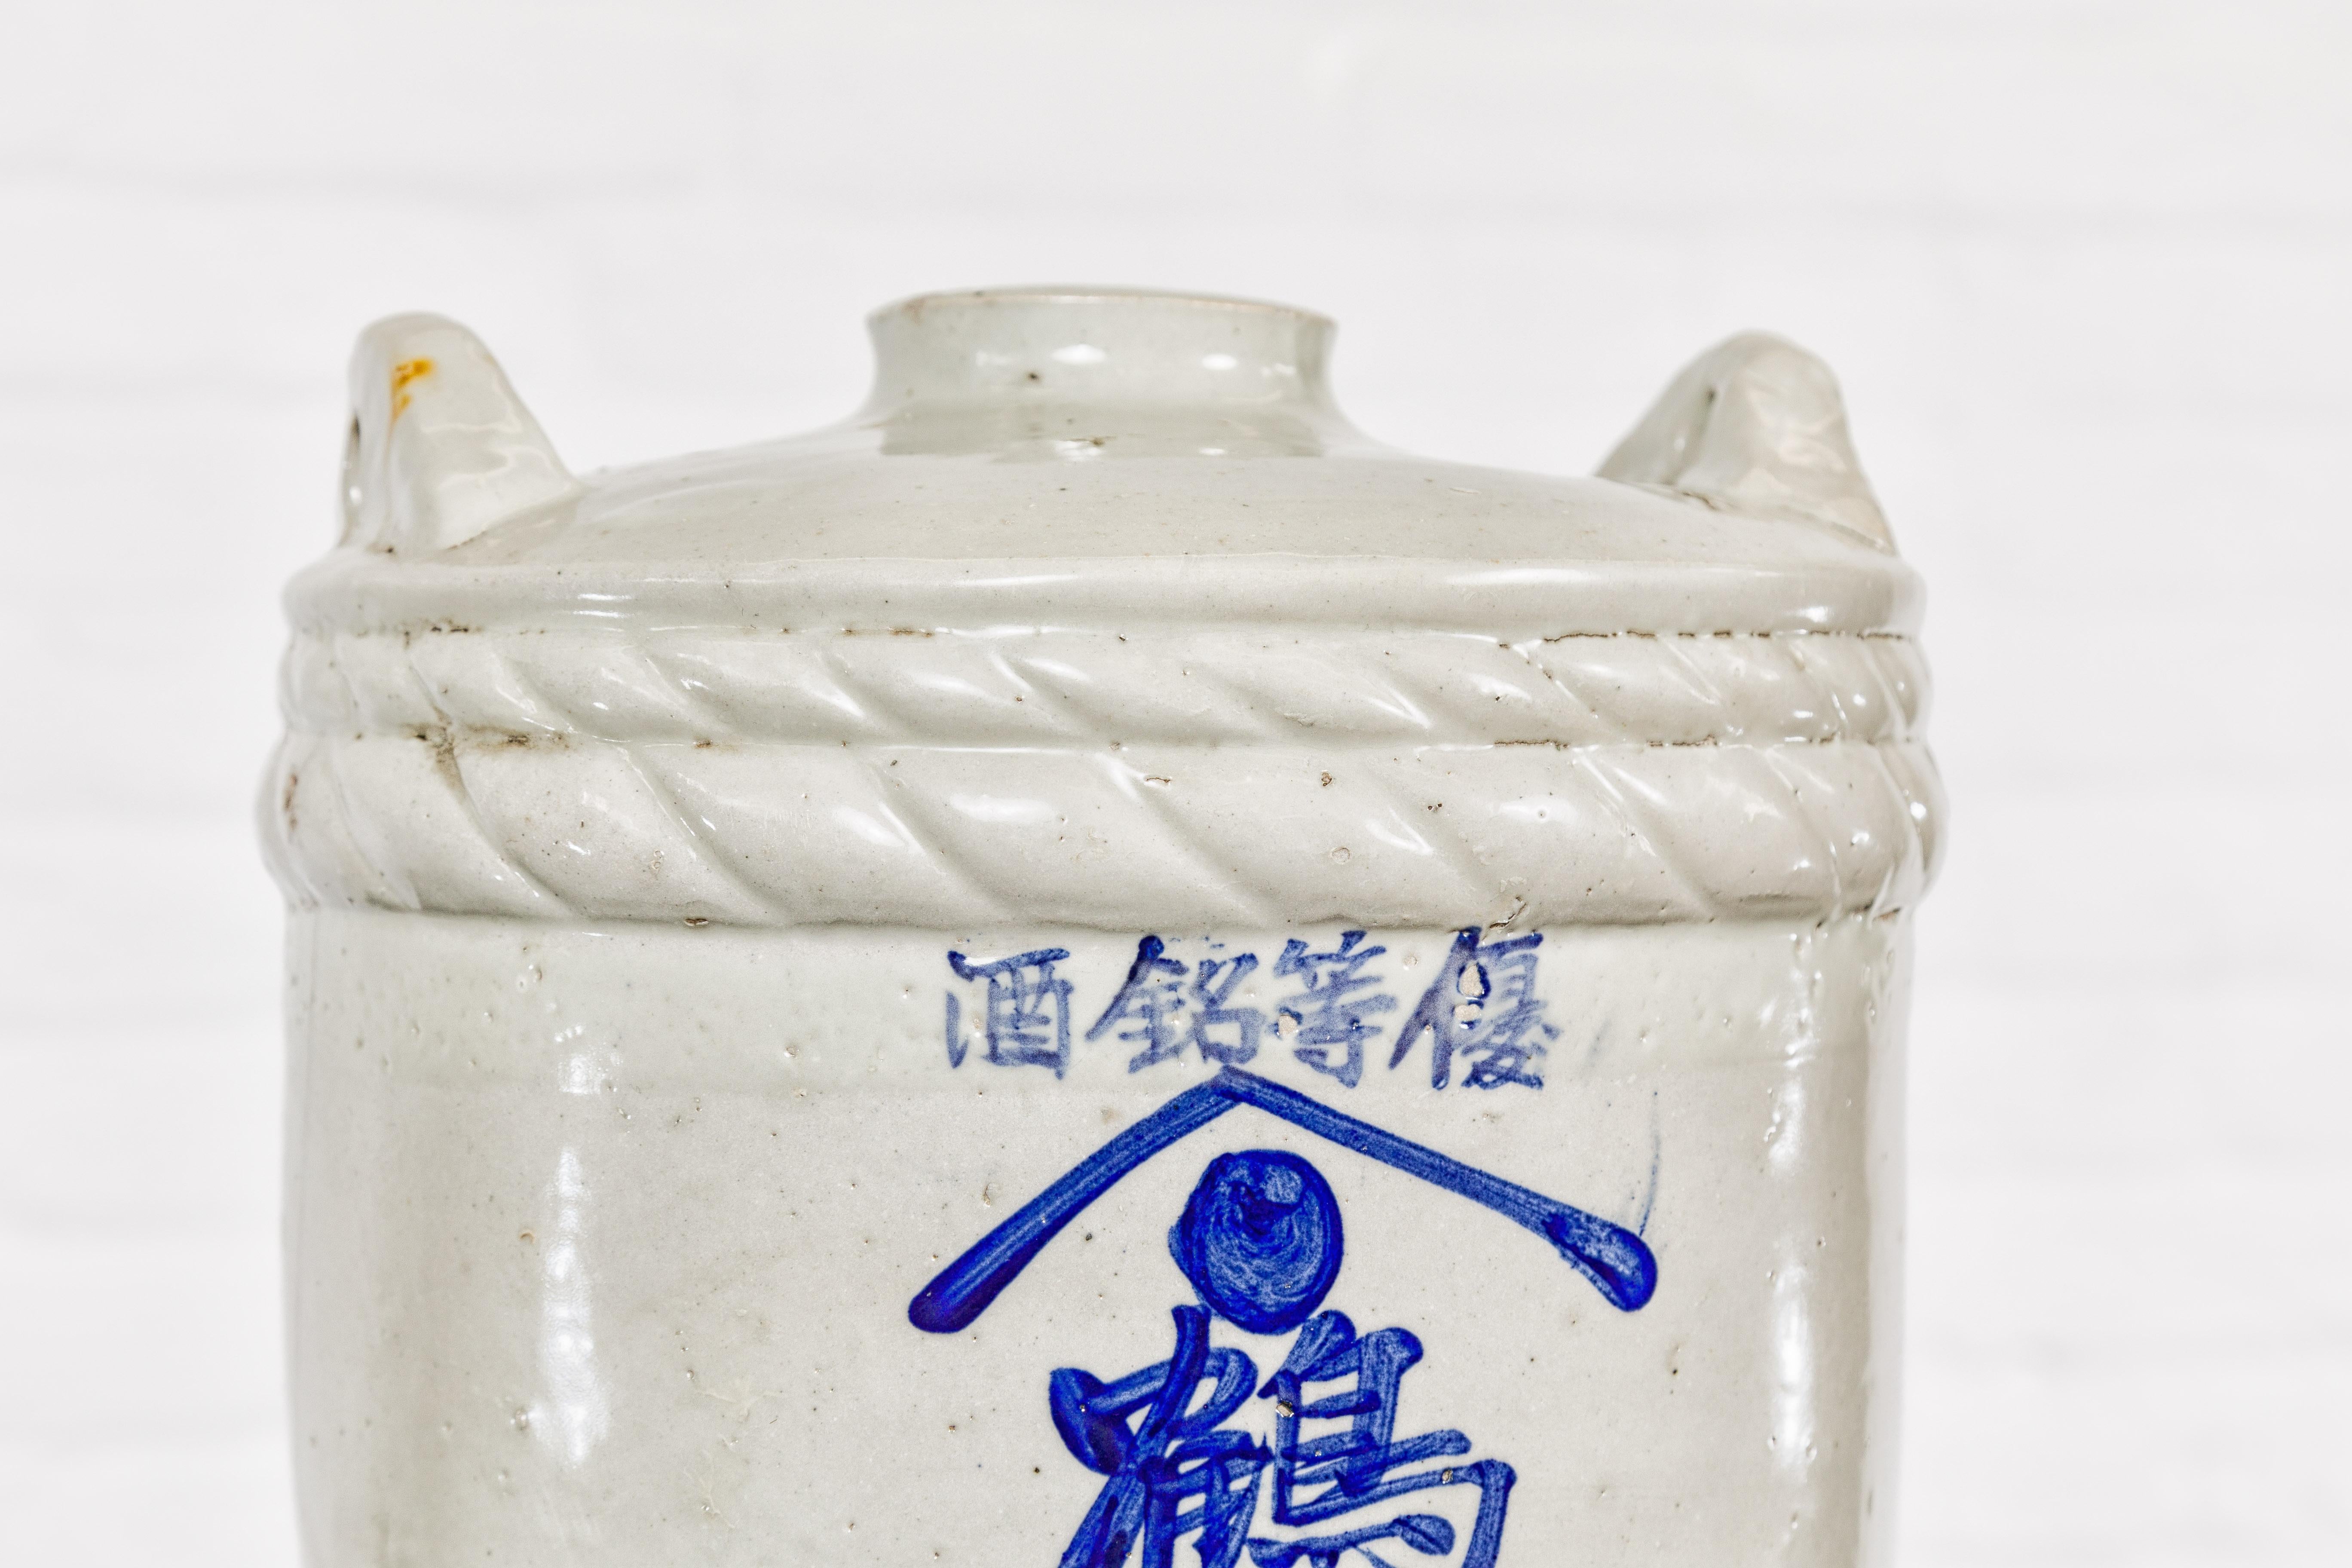 Japanese Meiji Period 19th Century Barrel Shaped Sake Jar with Calligraphy For Sale 3